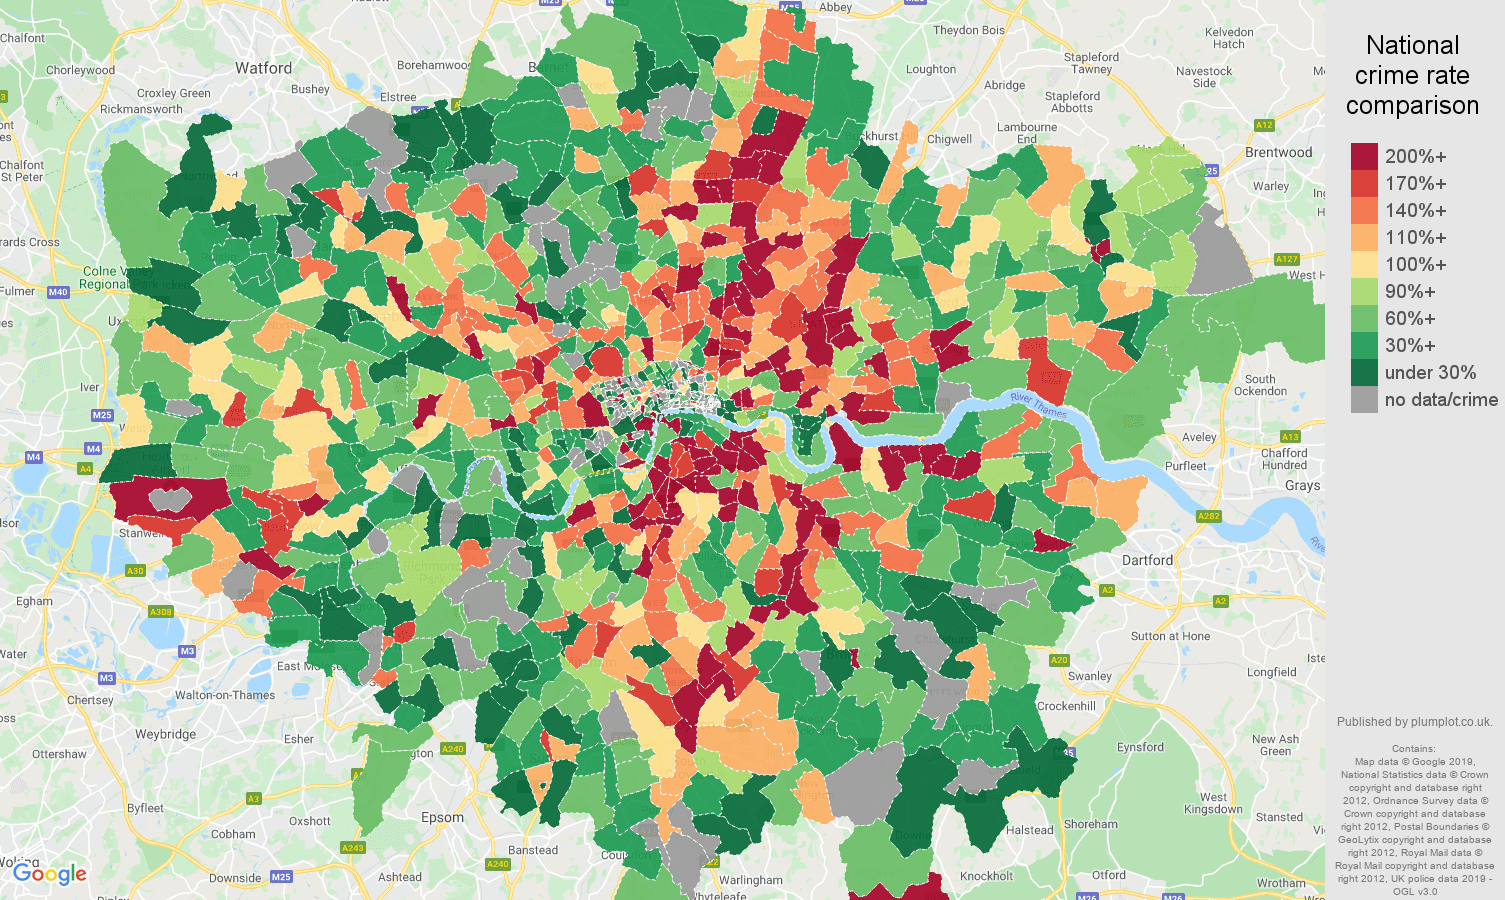 London possession of weapons crime rate comparison map